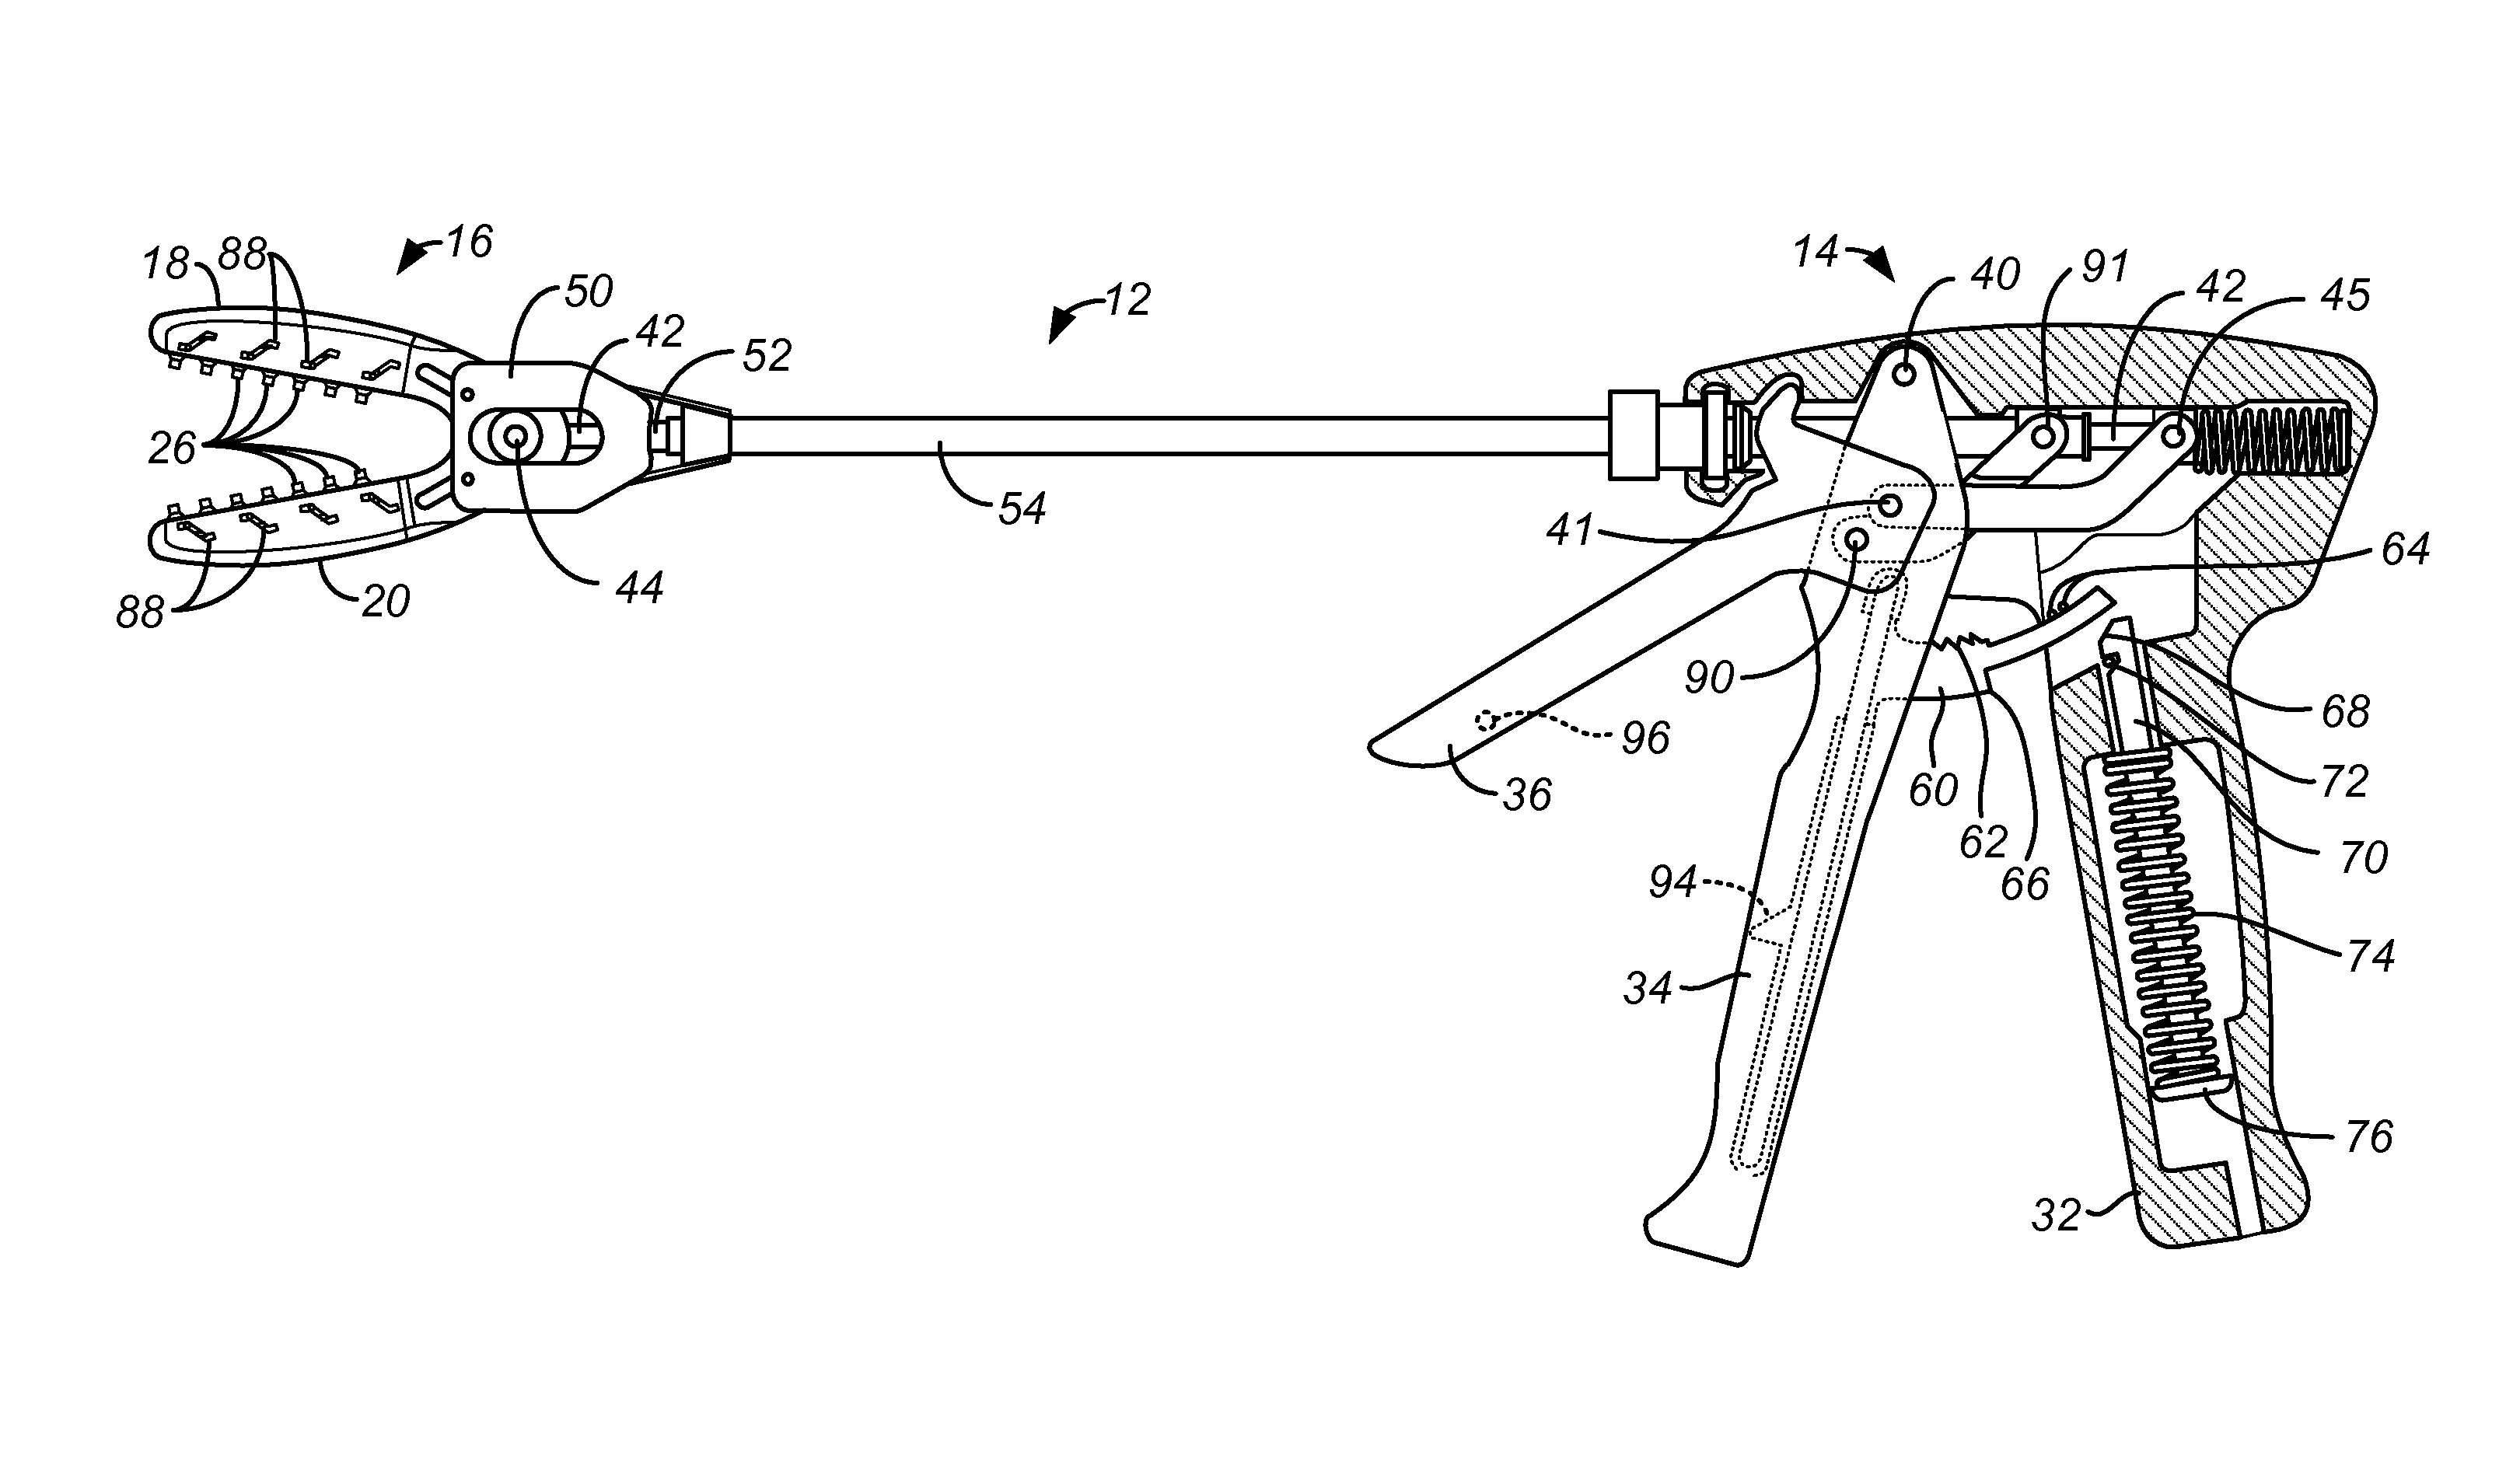 Delivery device and method for compliant tissue fasteners